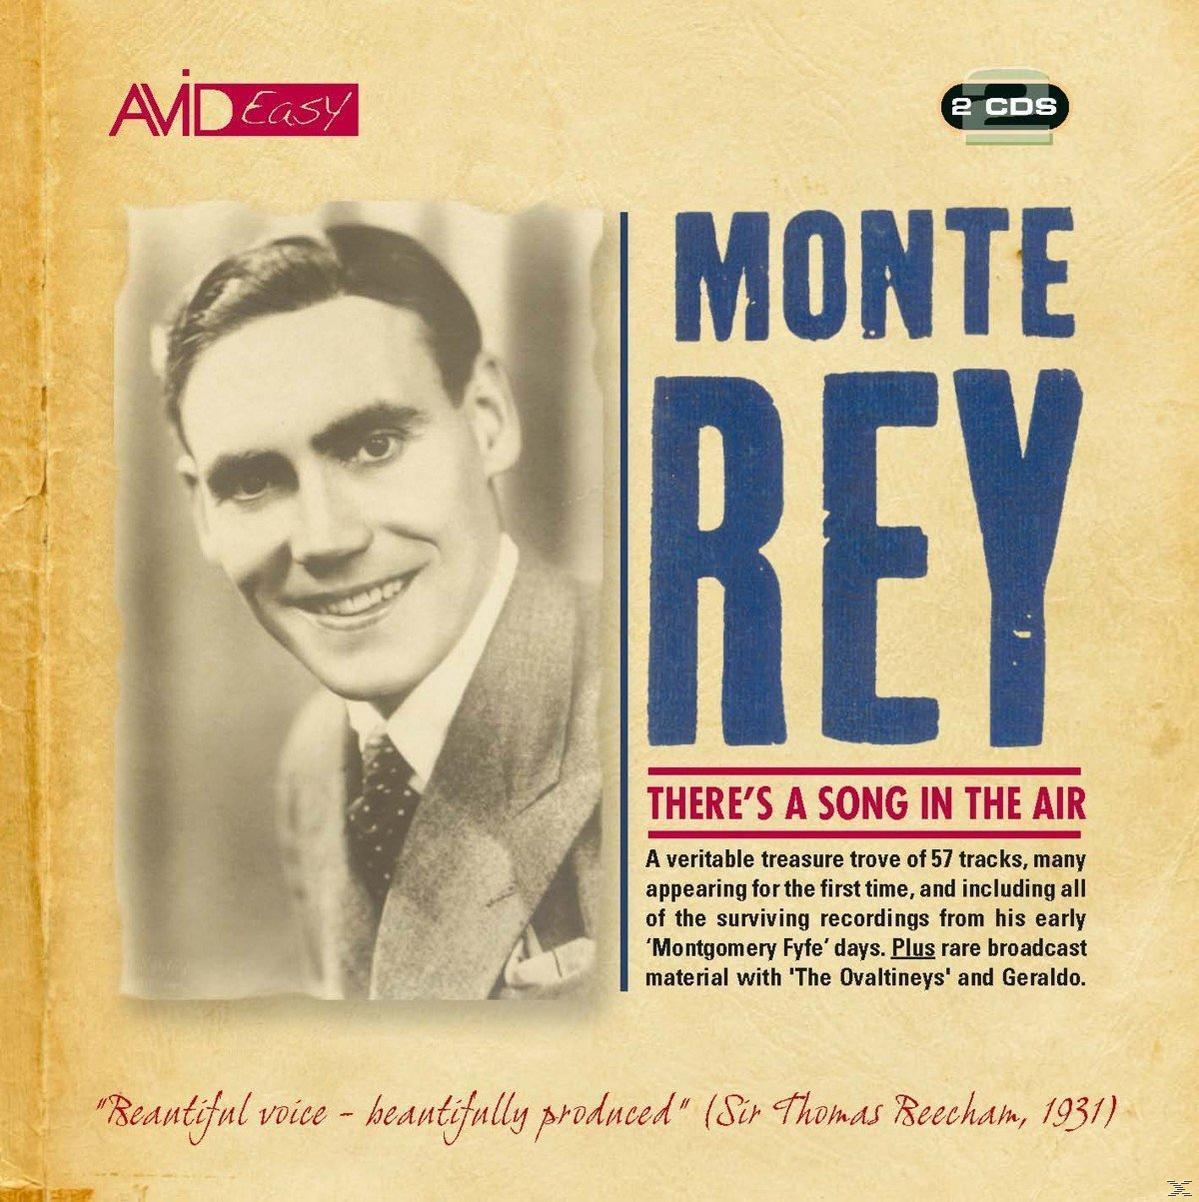 A Monte Air The (CD) Song Rey-Theres In - - Ray